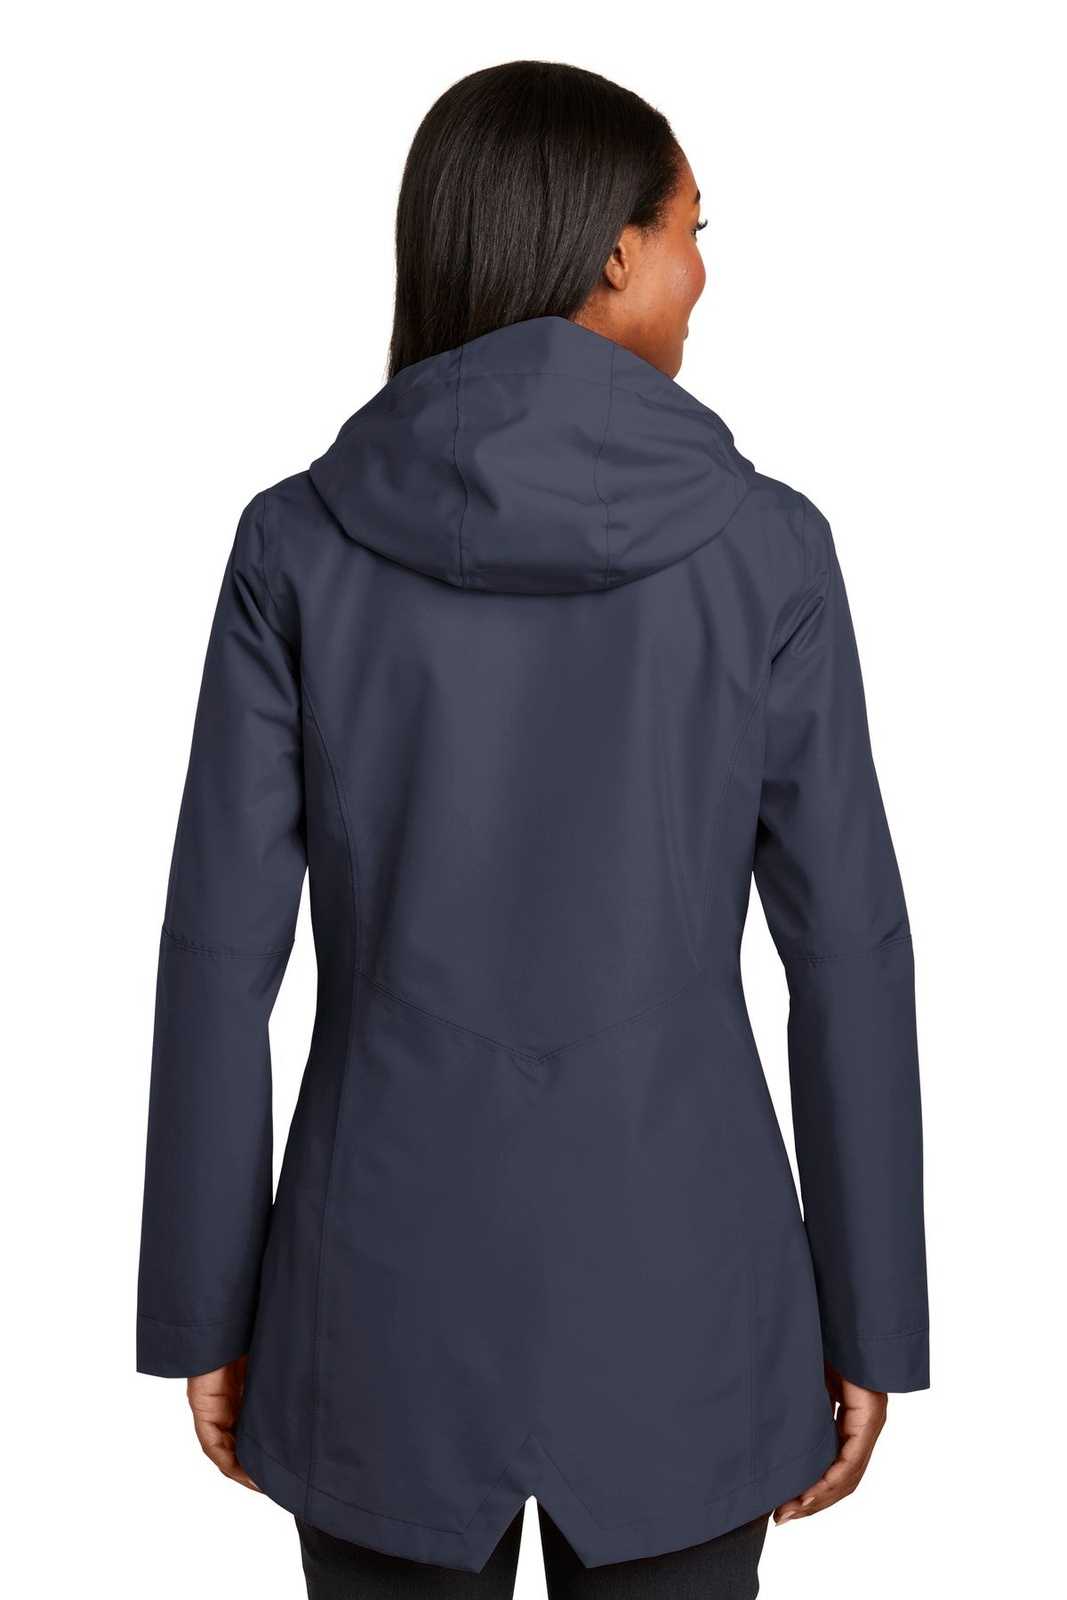 Port Authority L900 Ladies Collective Outer Shell Jacket - River Blue Navy - HIT a Double - 2